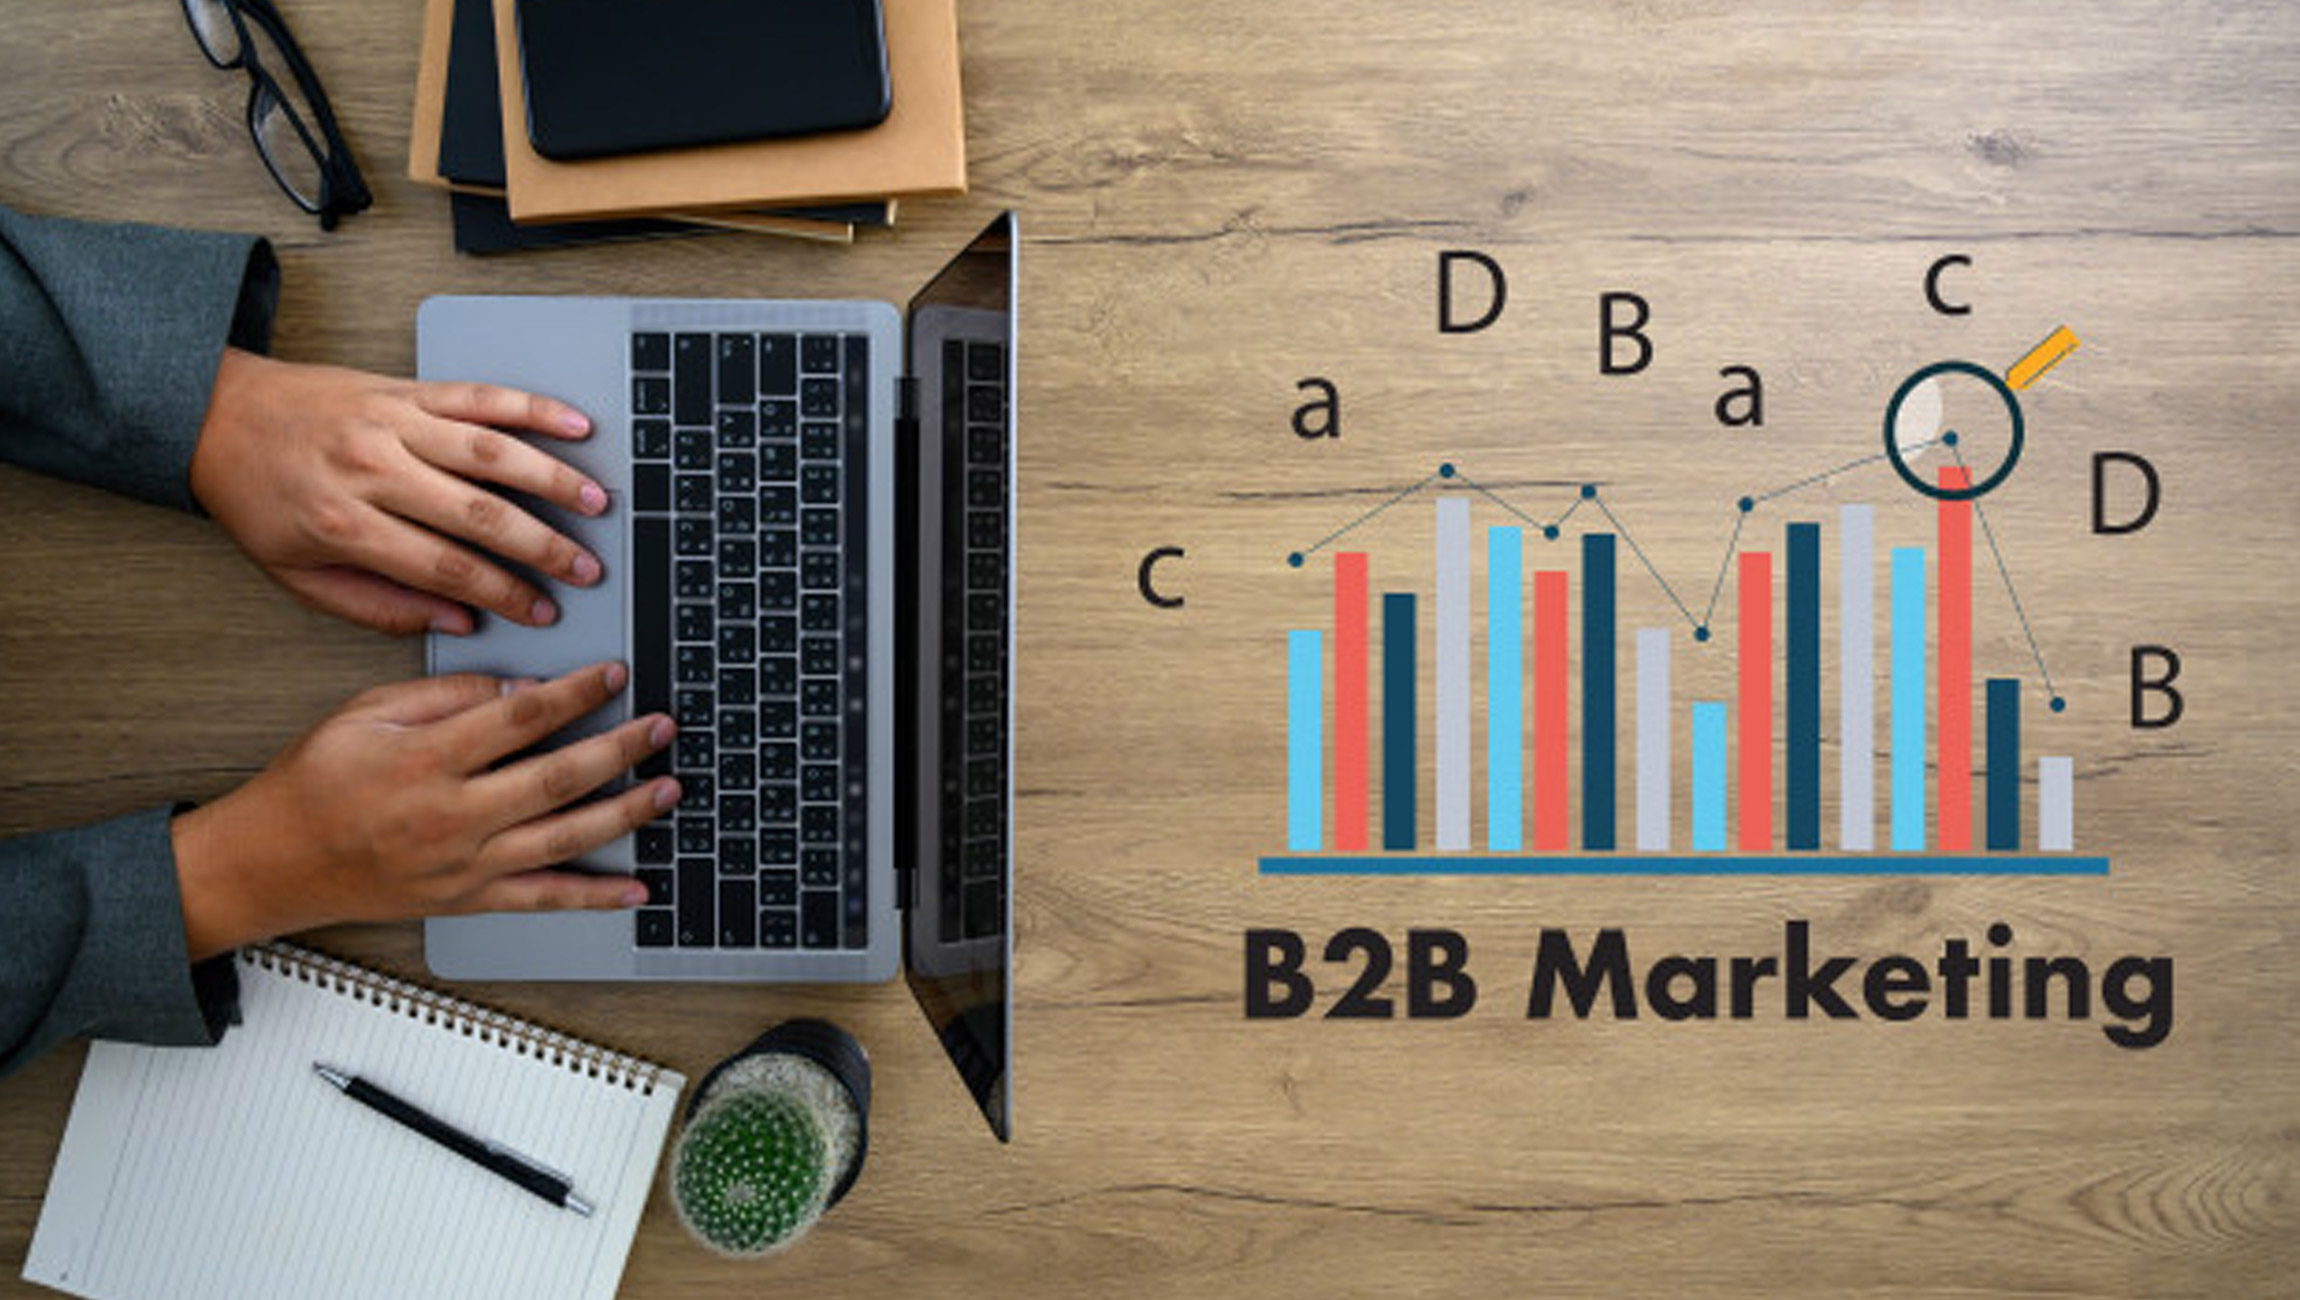 fishbat Shares Four Benefits Of Thought Leadership In B2B Marketing